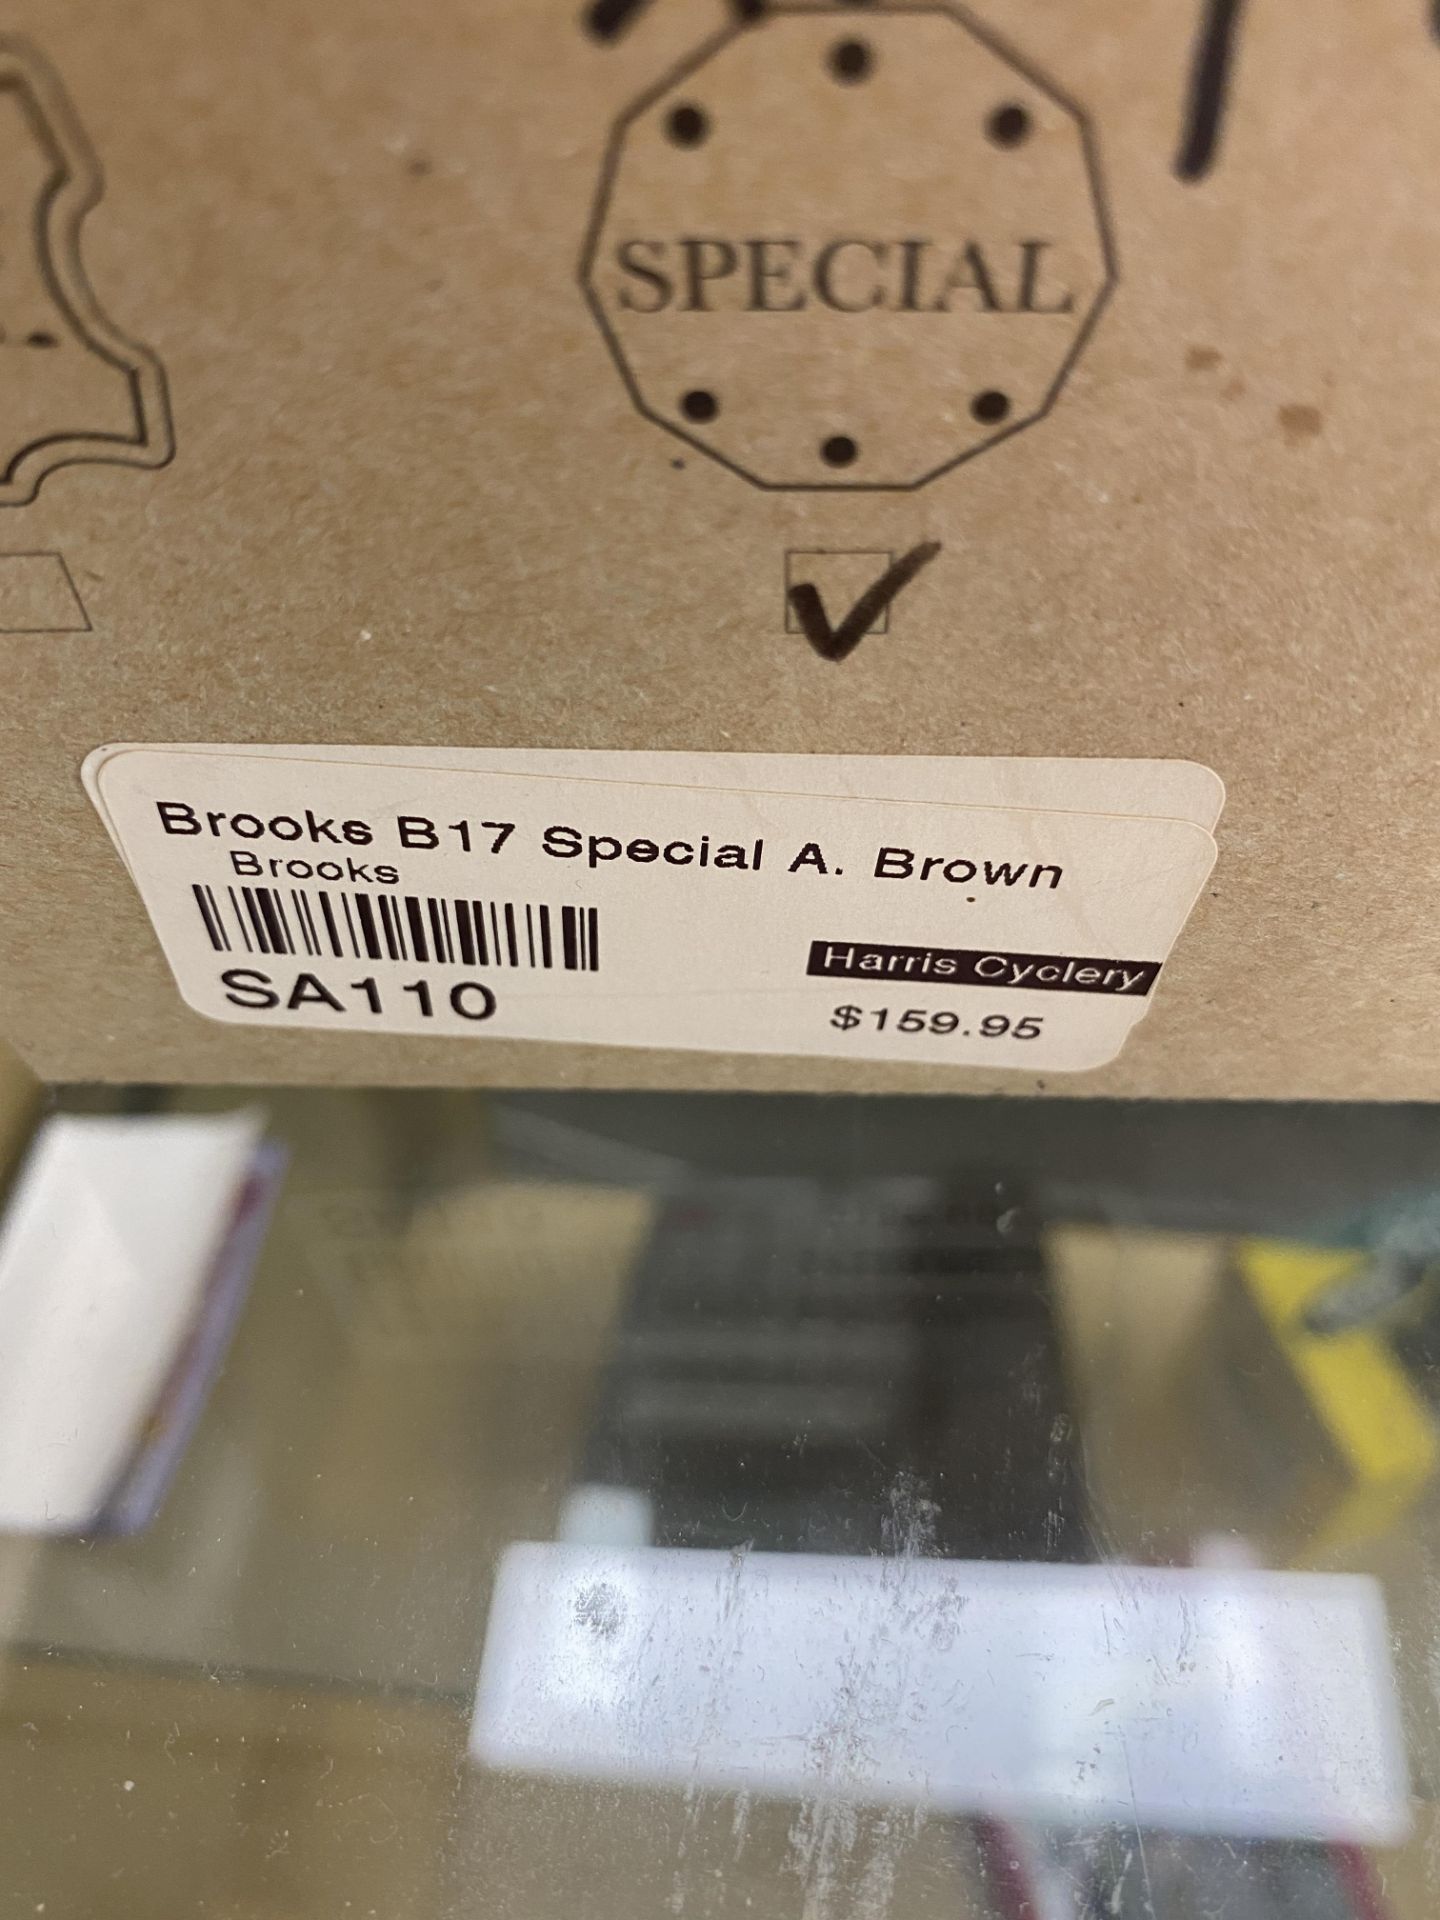 Brooks B17 Special Bicycle Seat $170 Retail - Image 2 of 2